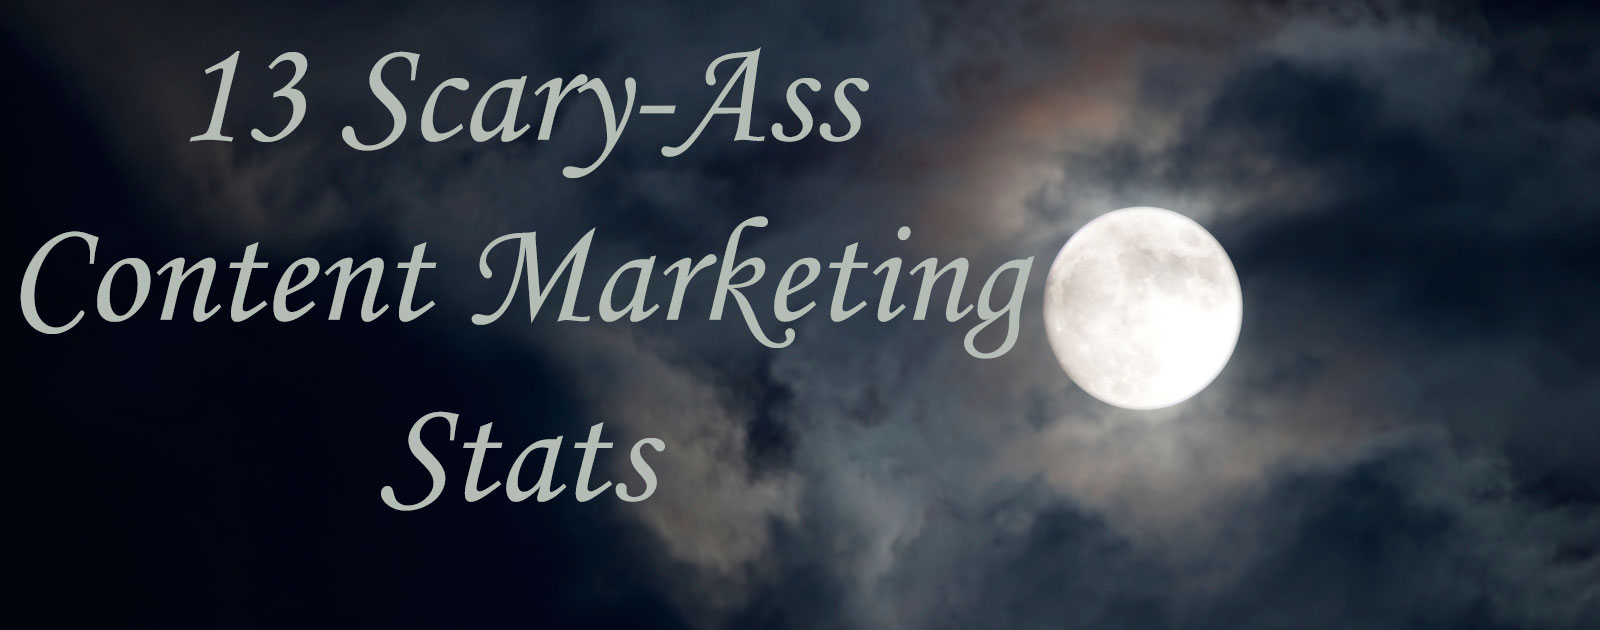 scary content marketing stats